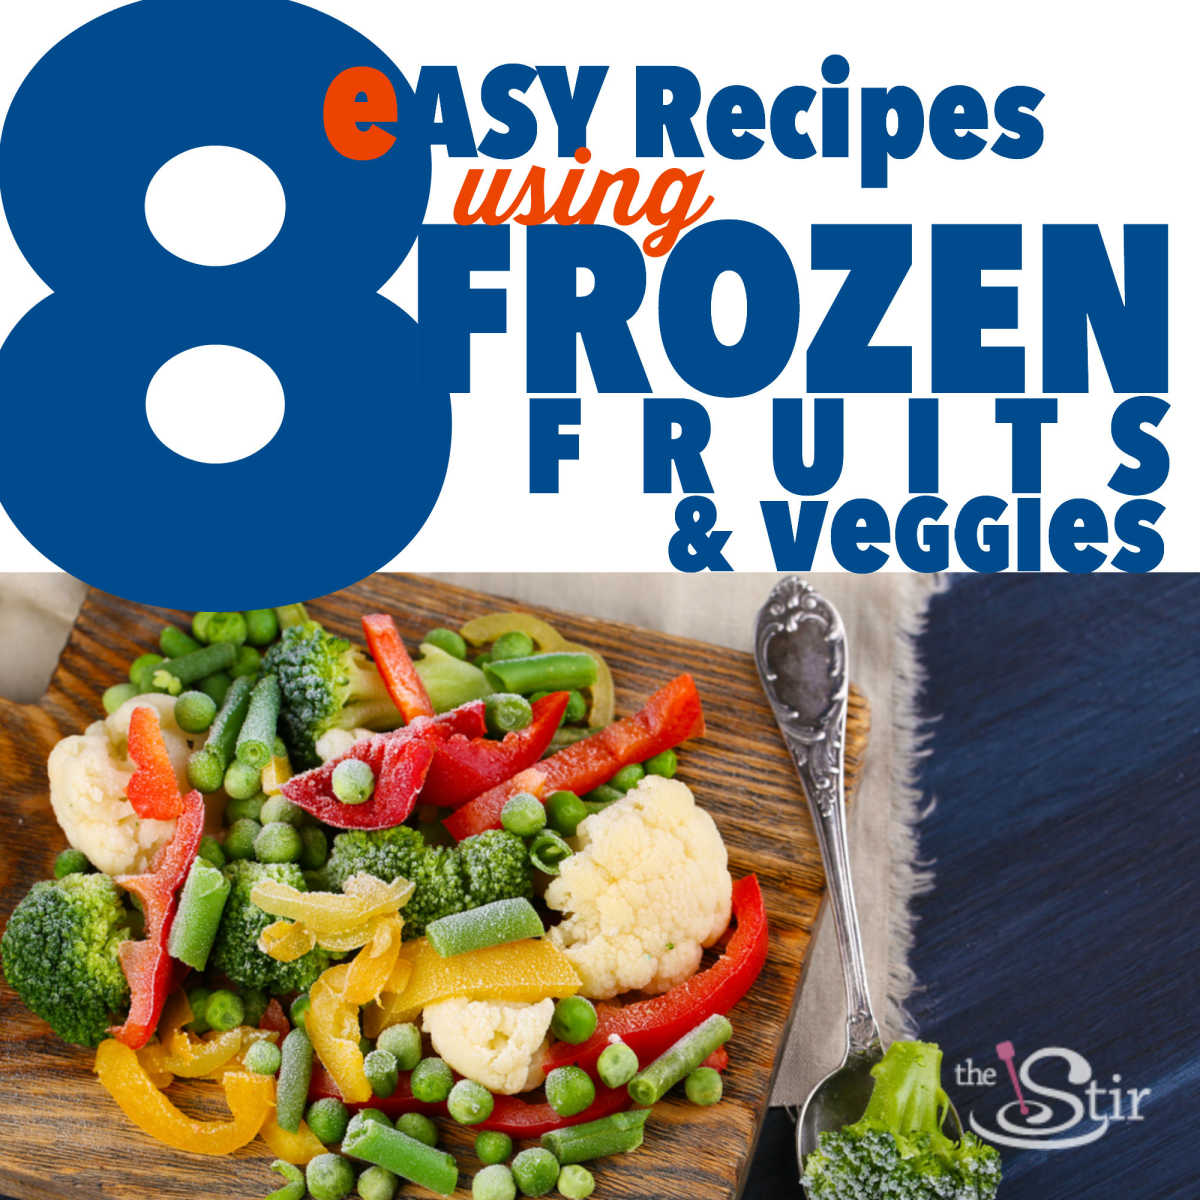 8 Recipes Using Frozen Fruits & Veggies So You Don't Have to Wait for ...